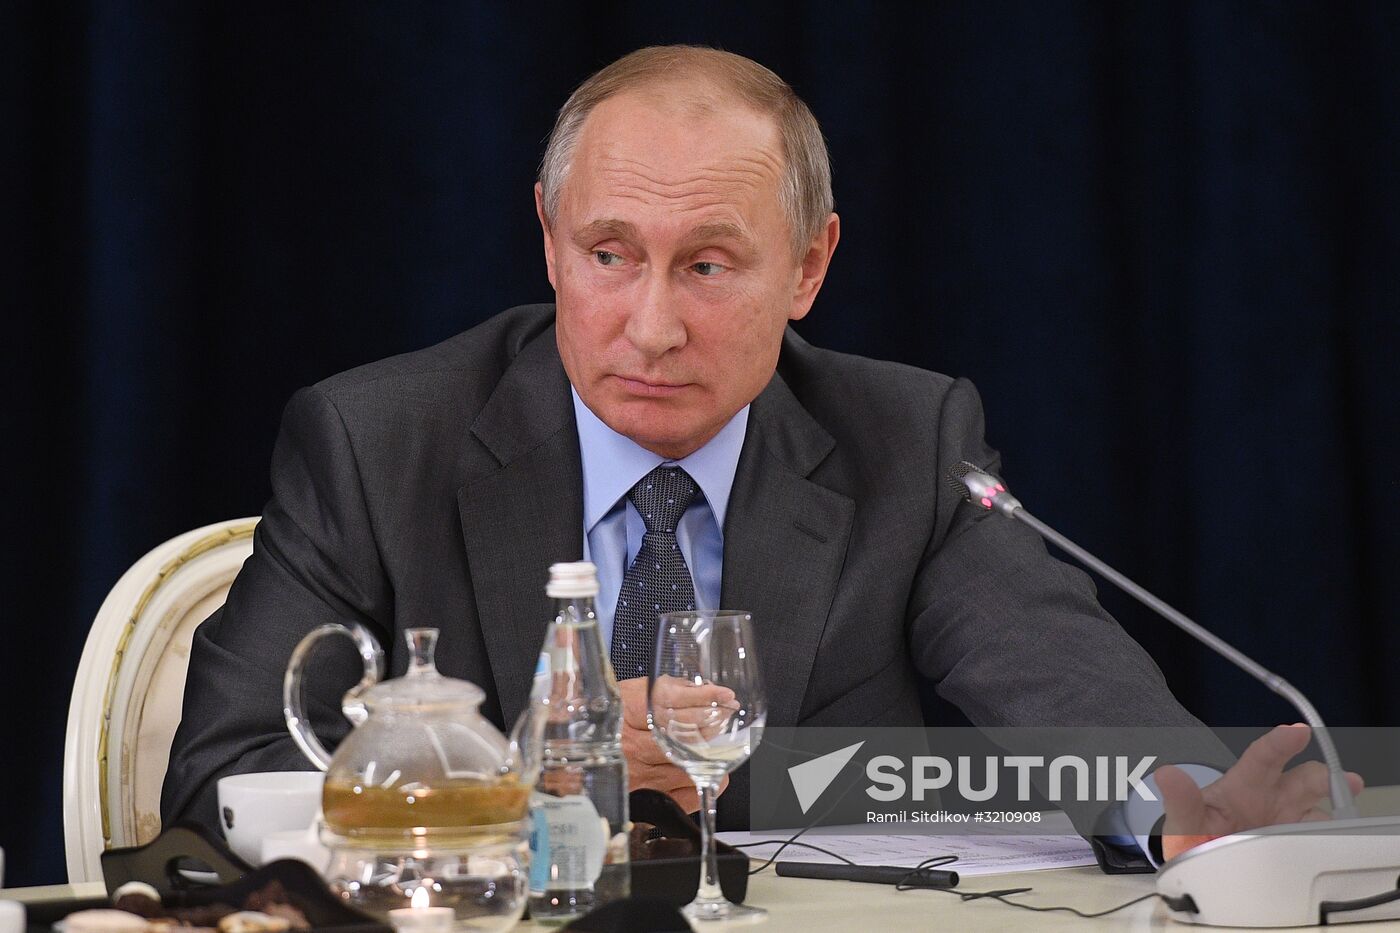 President Putin meets with German business leaders